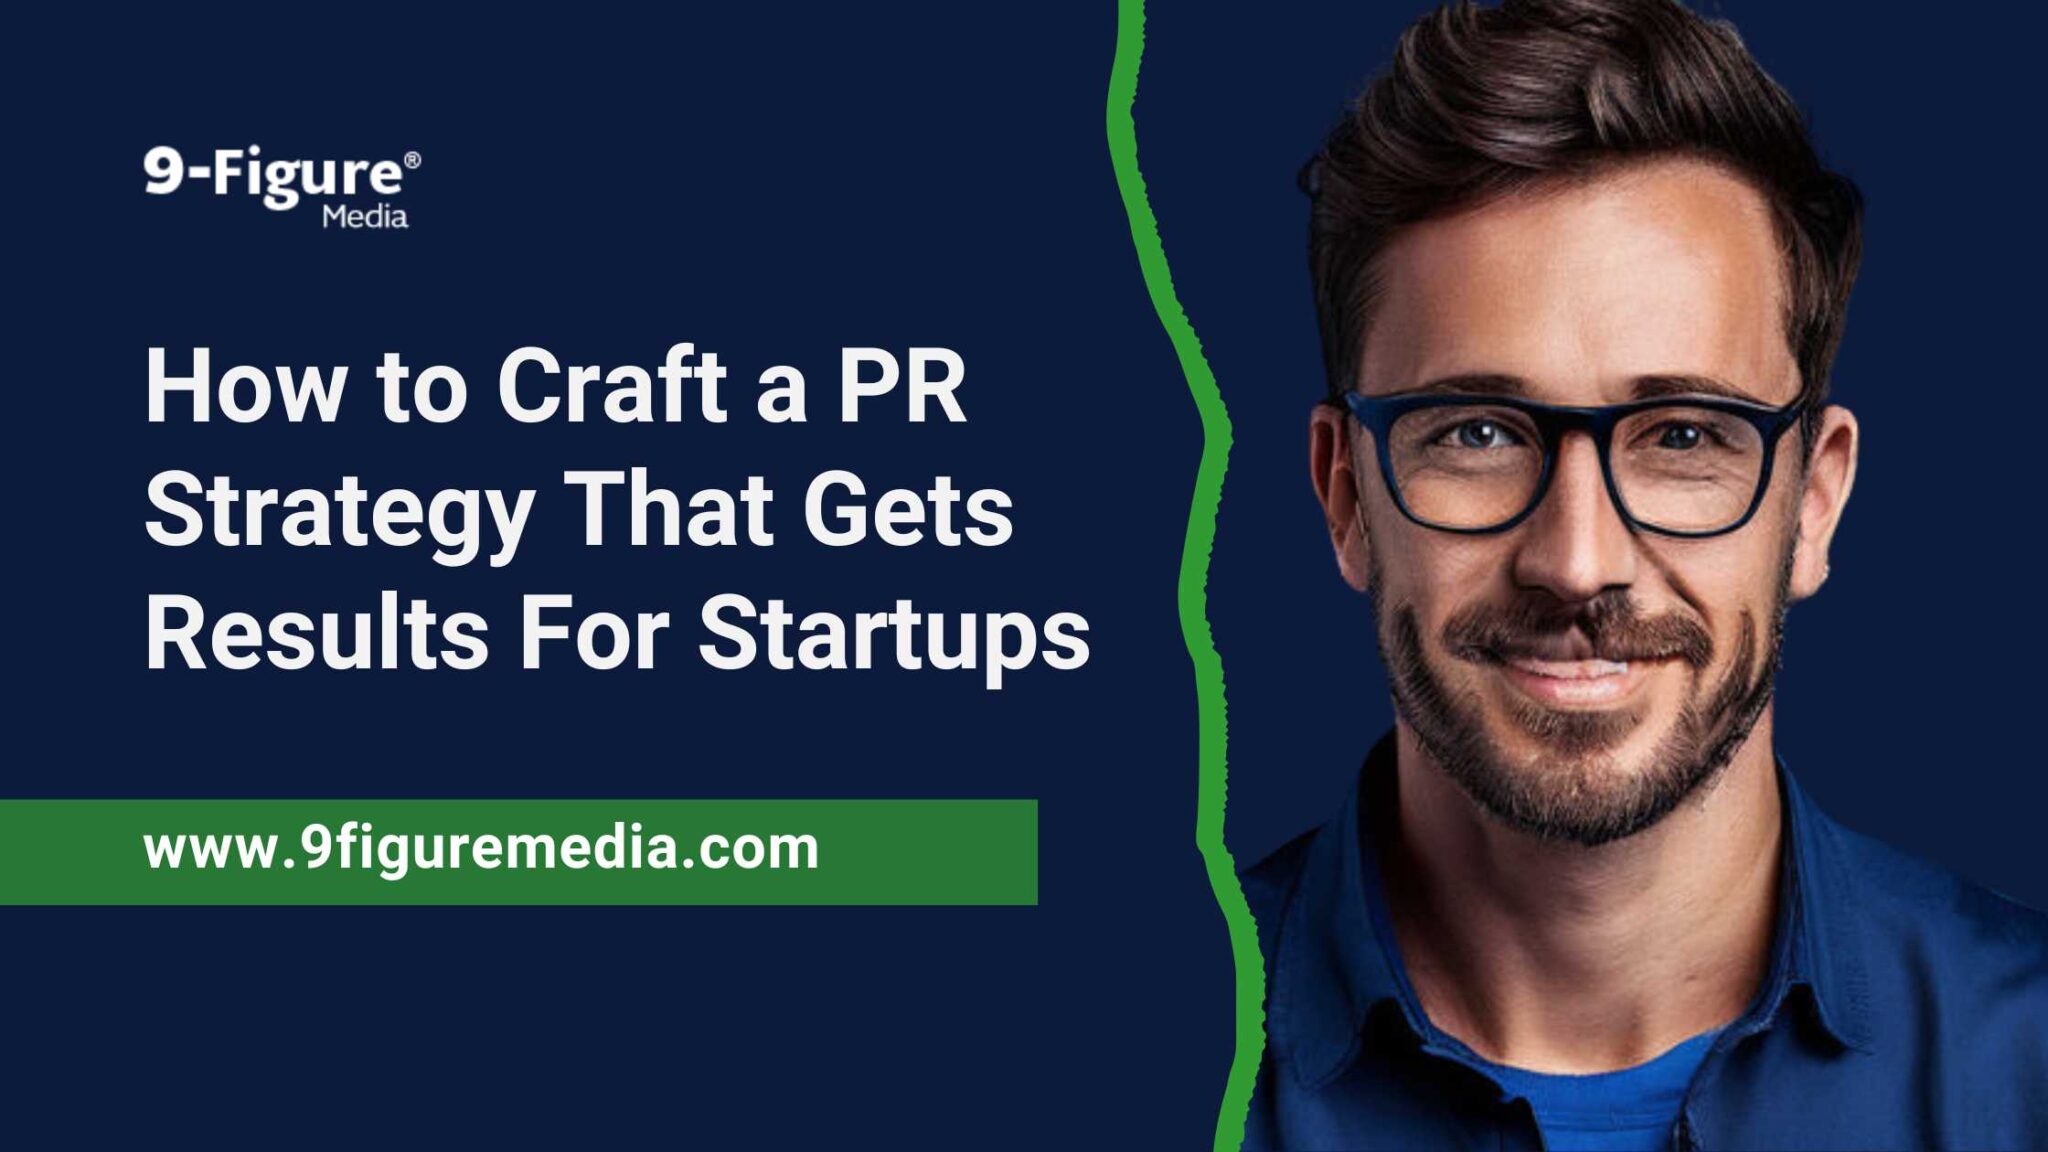 How to Craft a PR Strategy That Gets Results For Startups